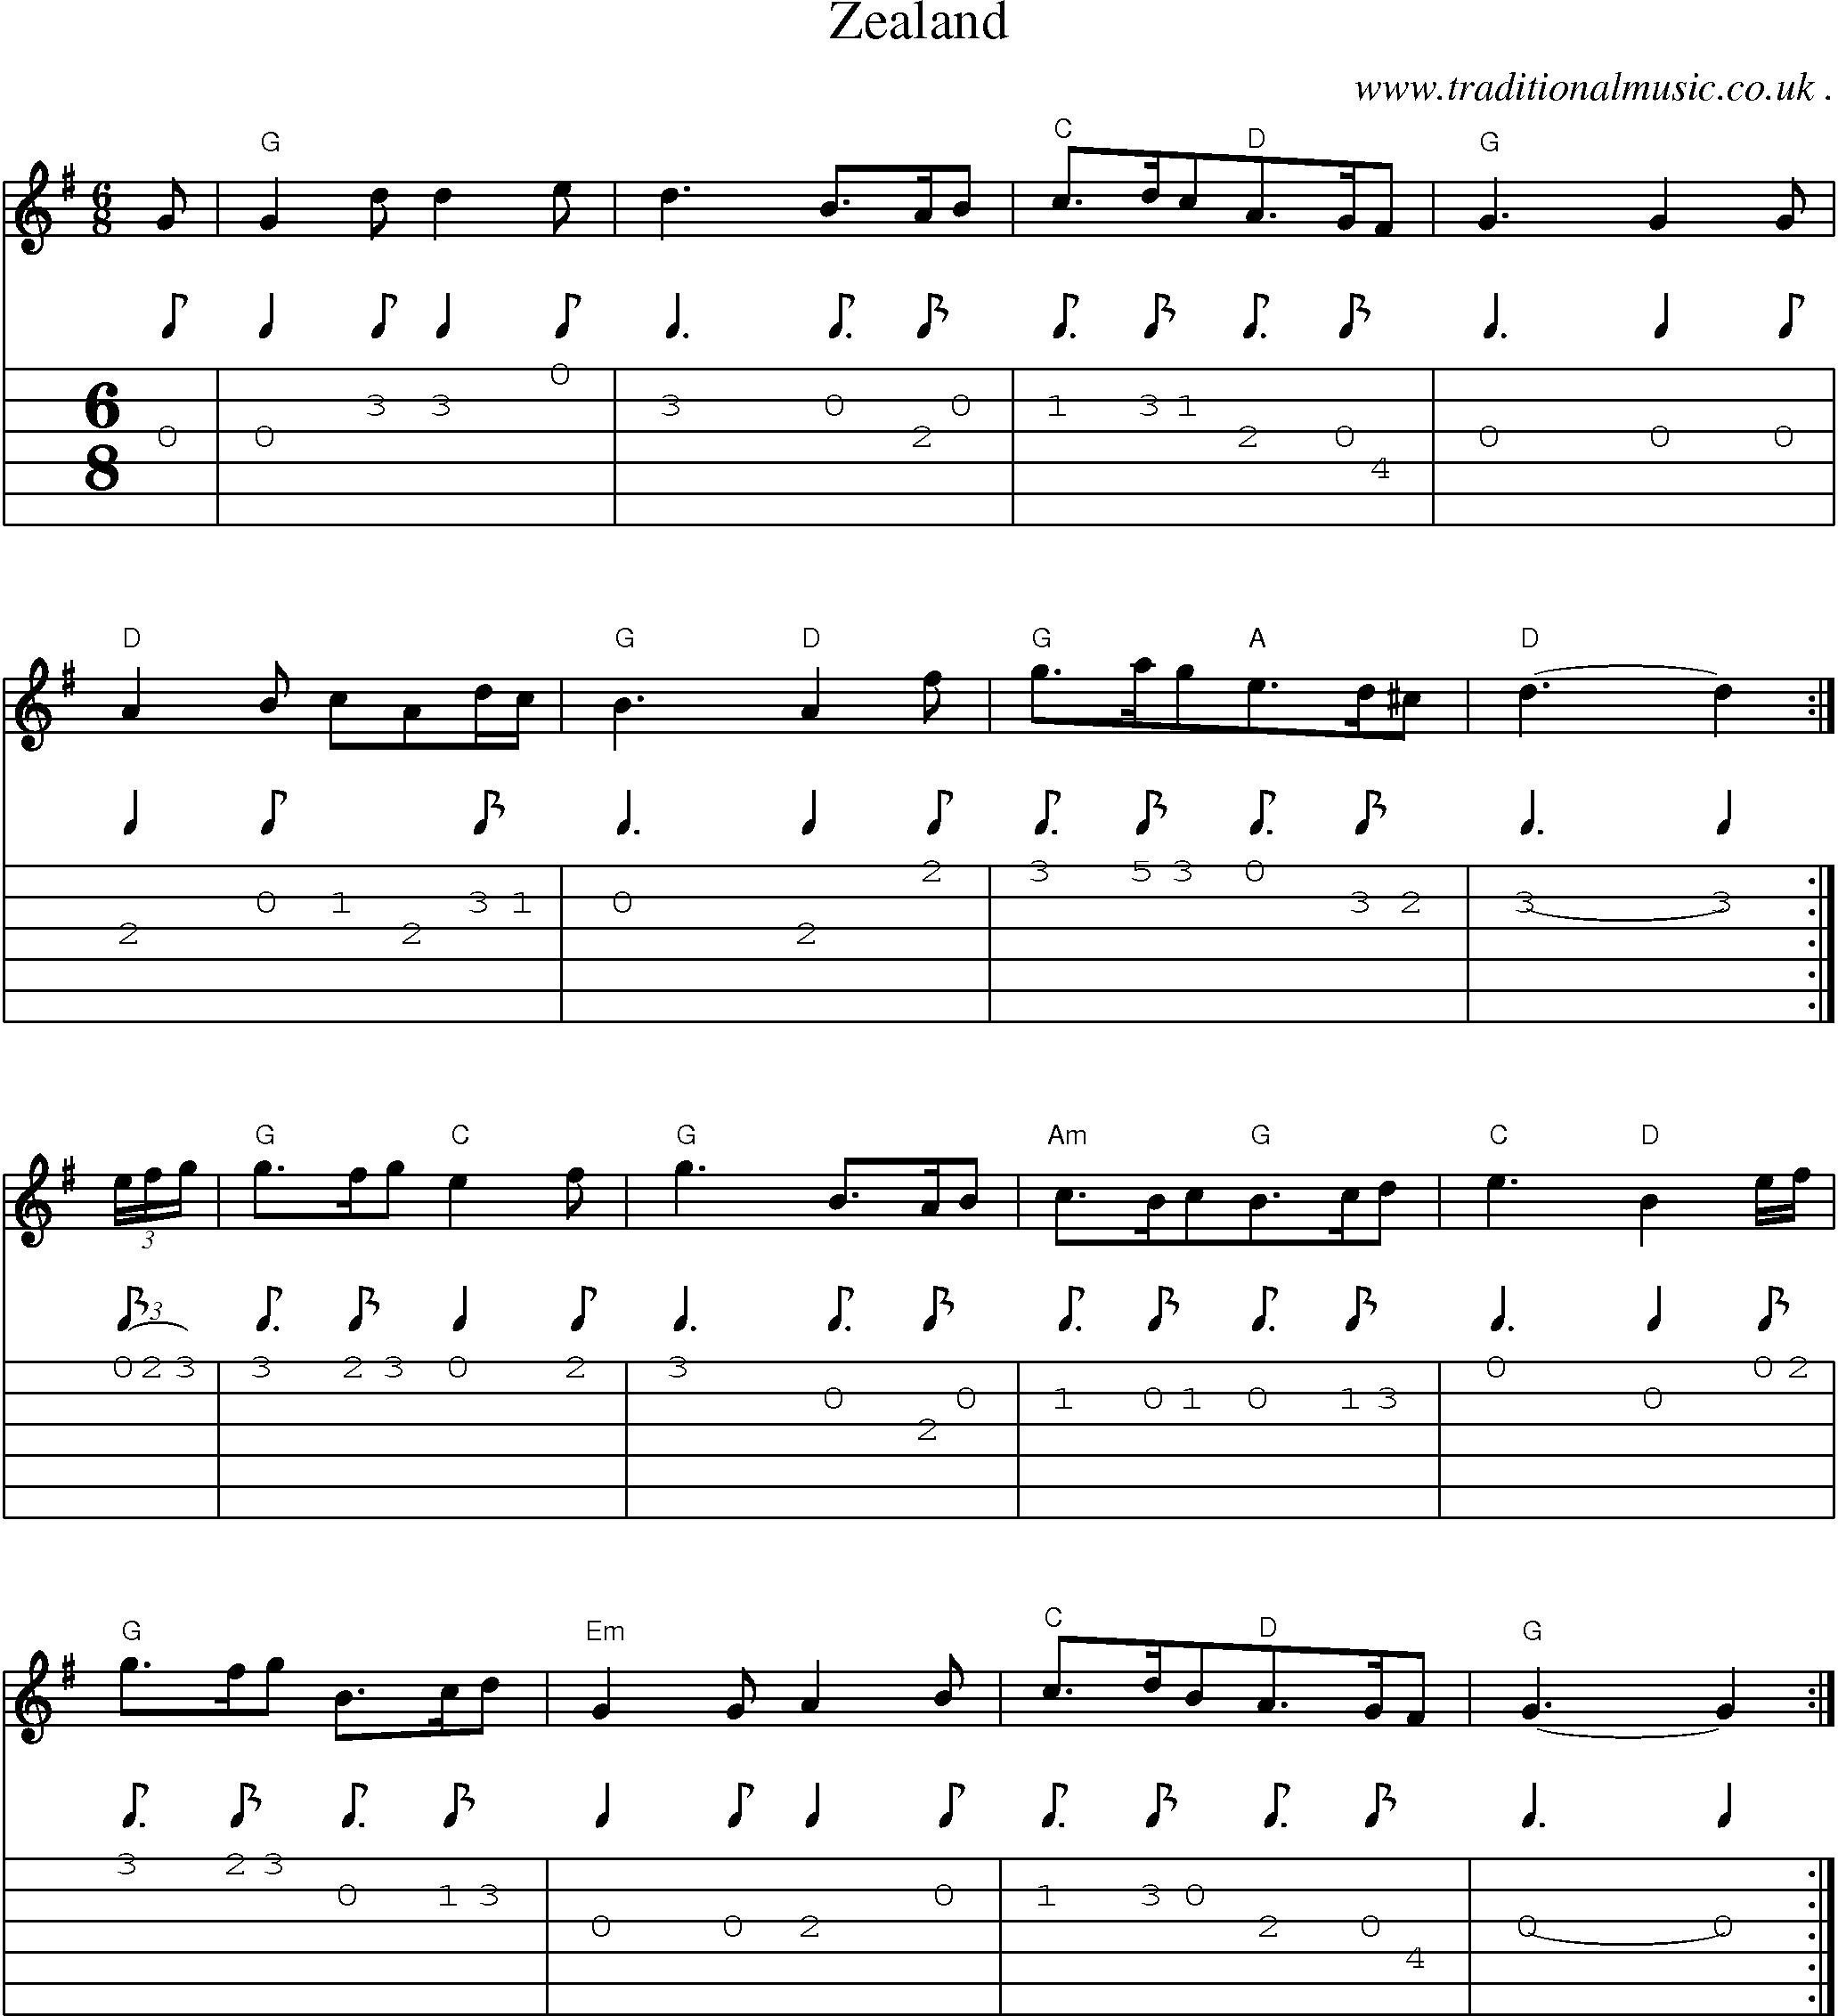 Sheet-Music and Guitar Tabs for Zealand